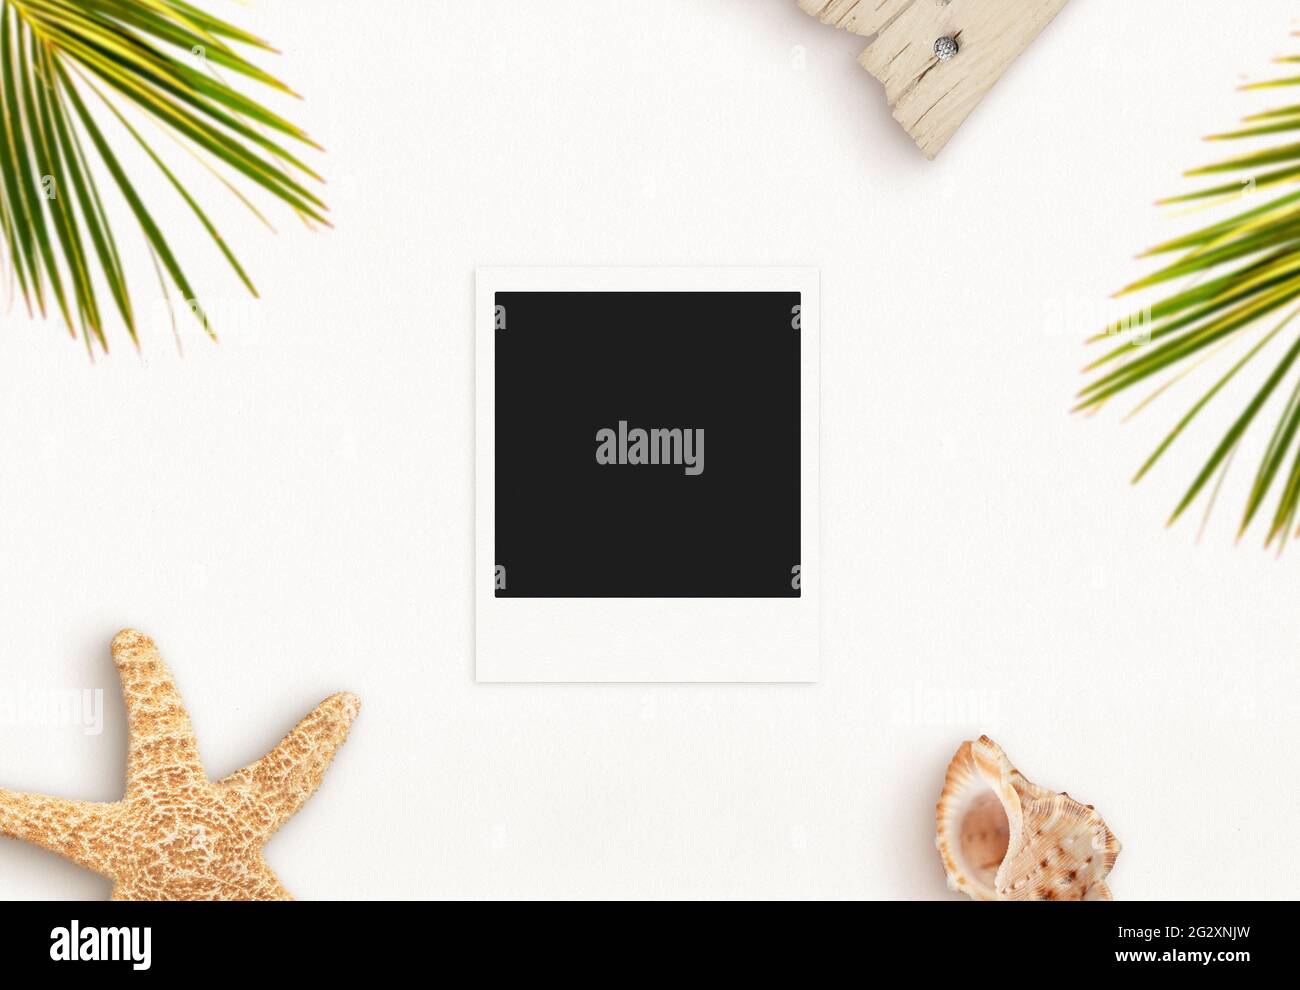 Photo paper on desk surrounded with summer, travel objects. Blank paper for mockup, vacation memories presentation. Palm leaves, starfish and shell. T Stock Photo